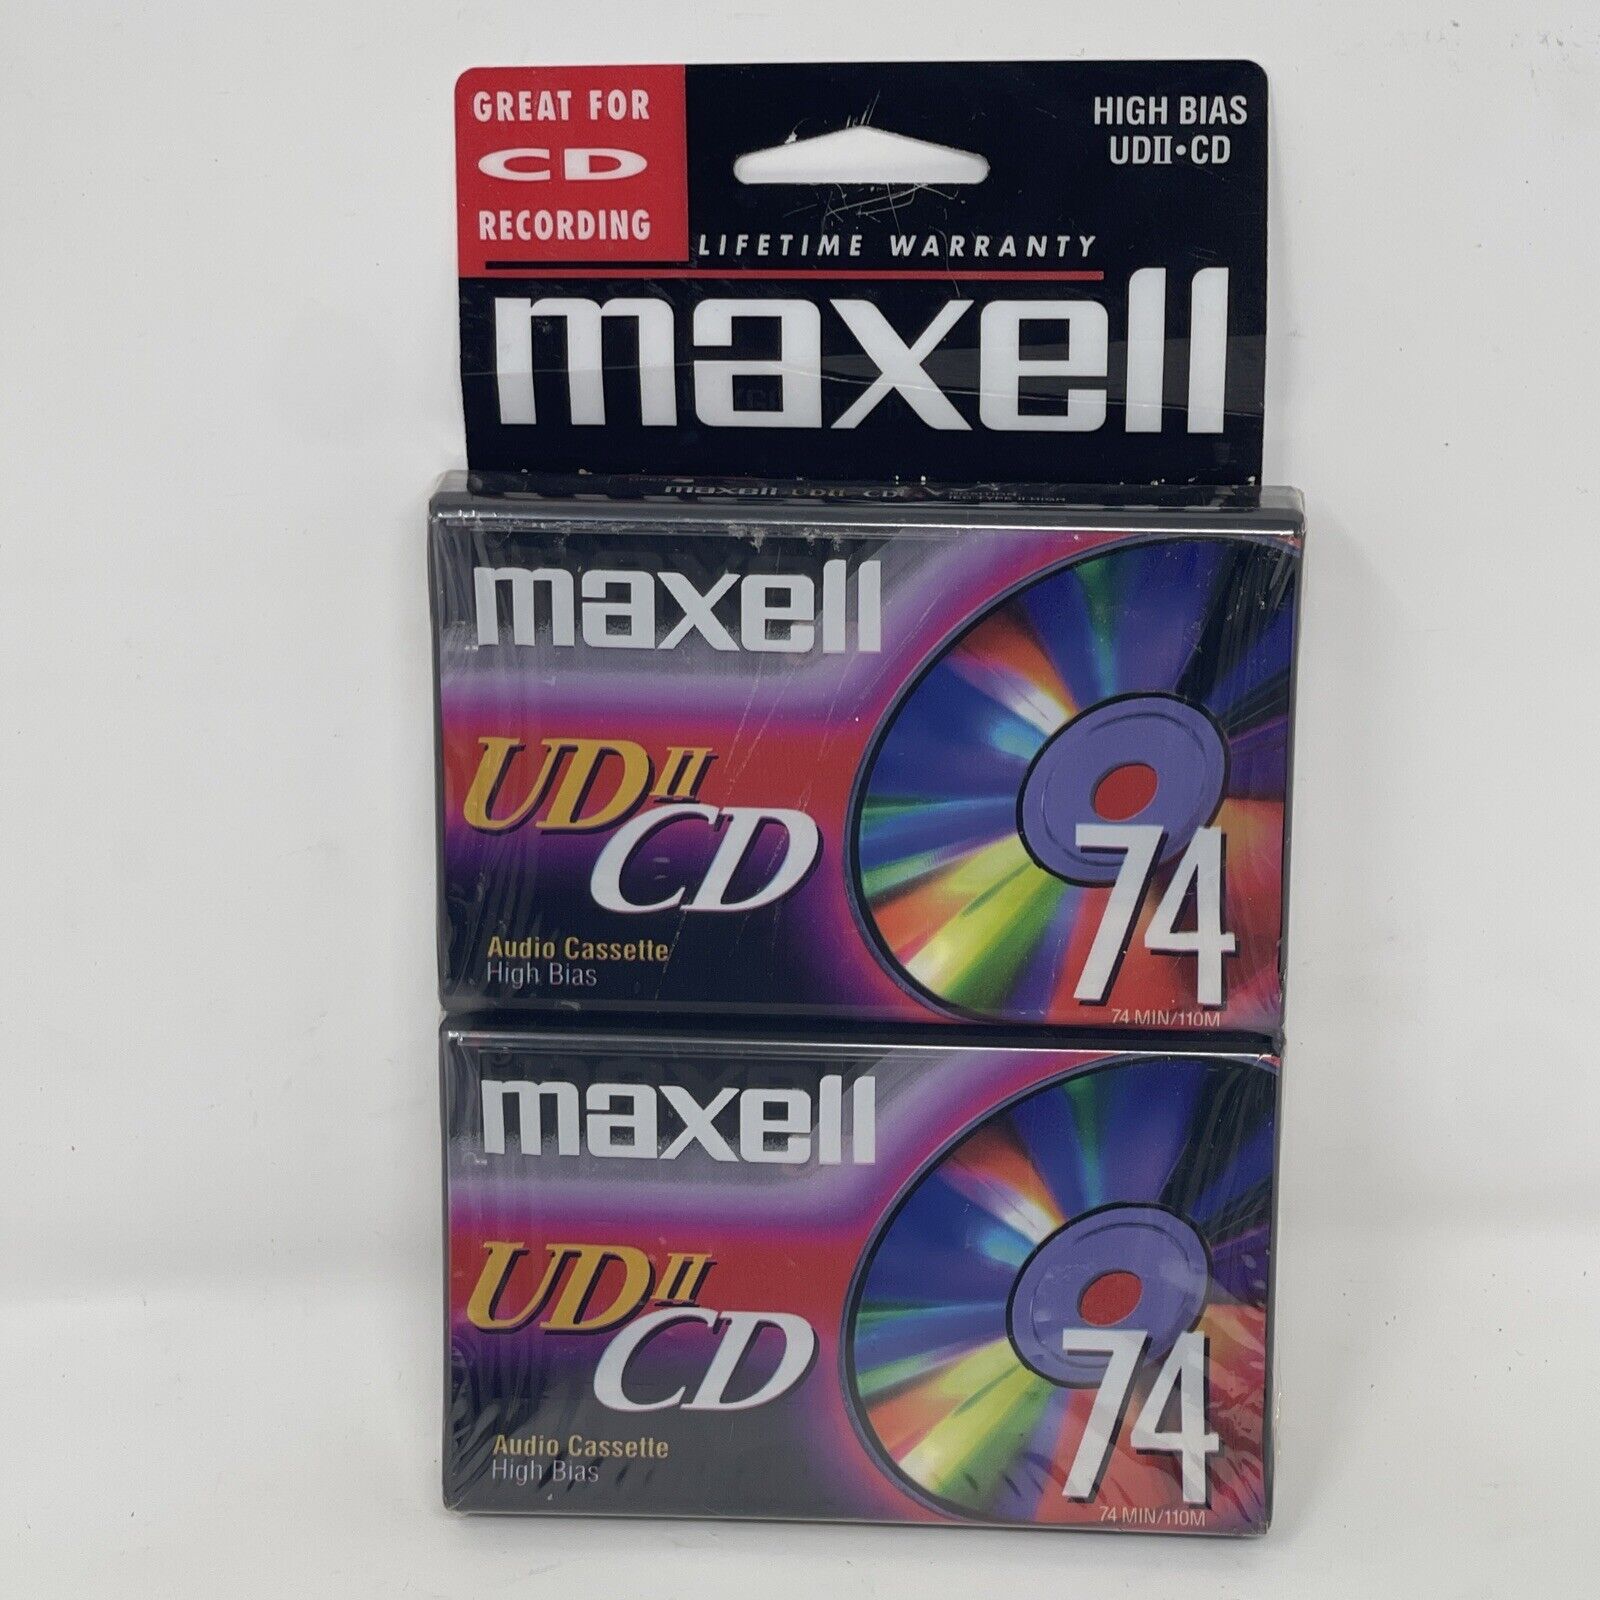 2 New Maxell UD II CD High Bias Audio Cassette Tapes 74 Minutes Brand New SEALED